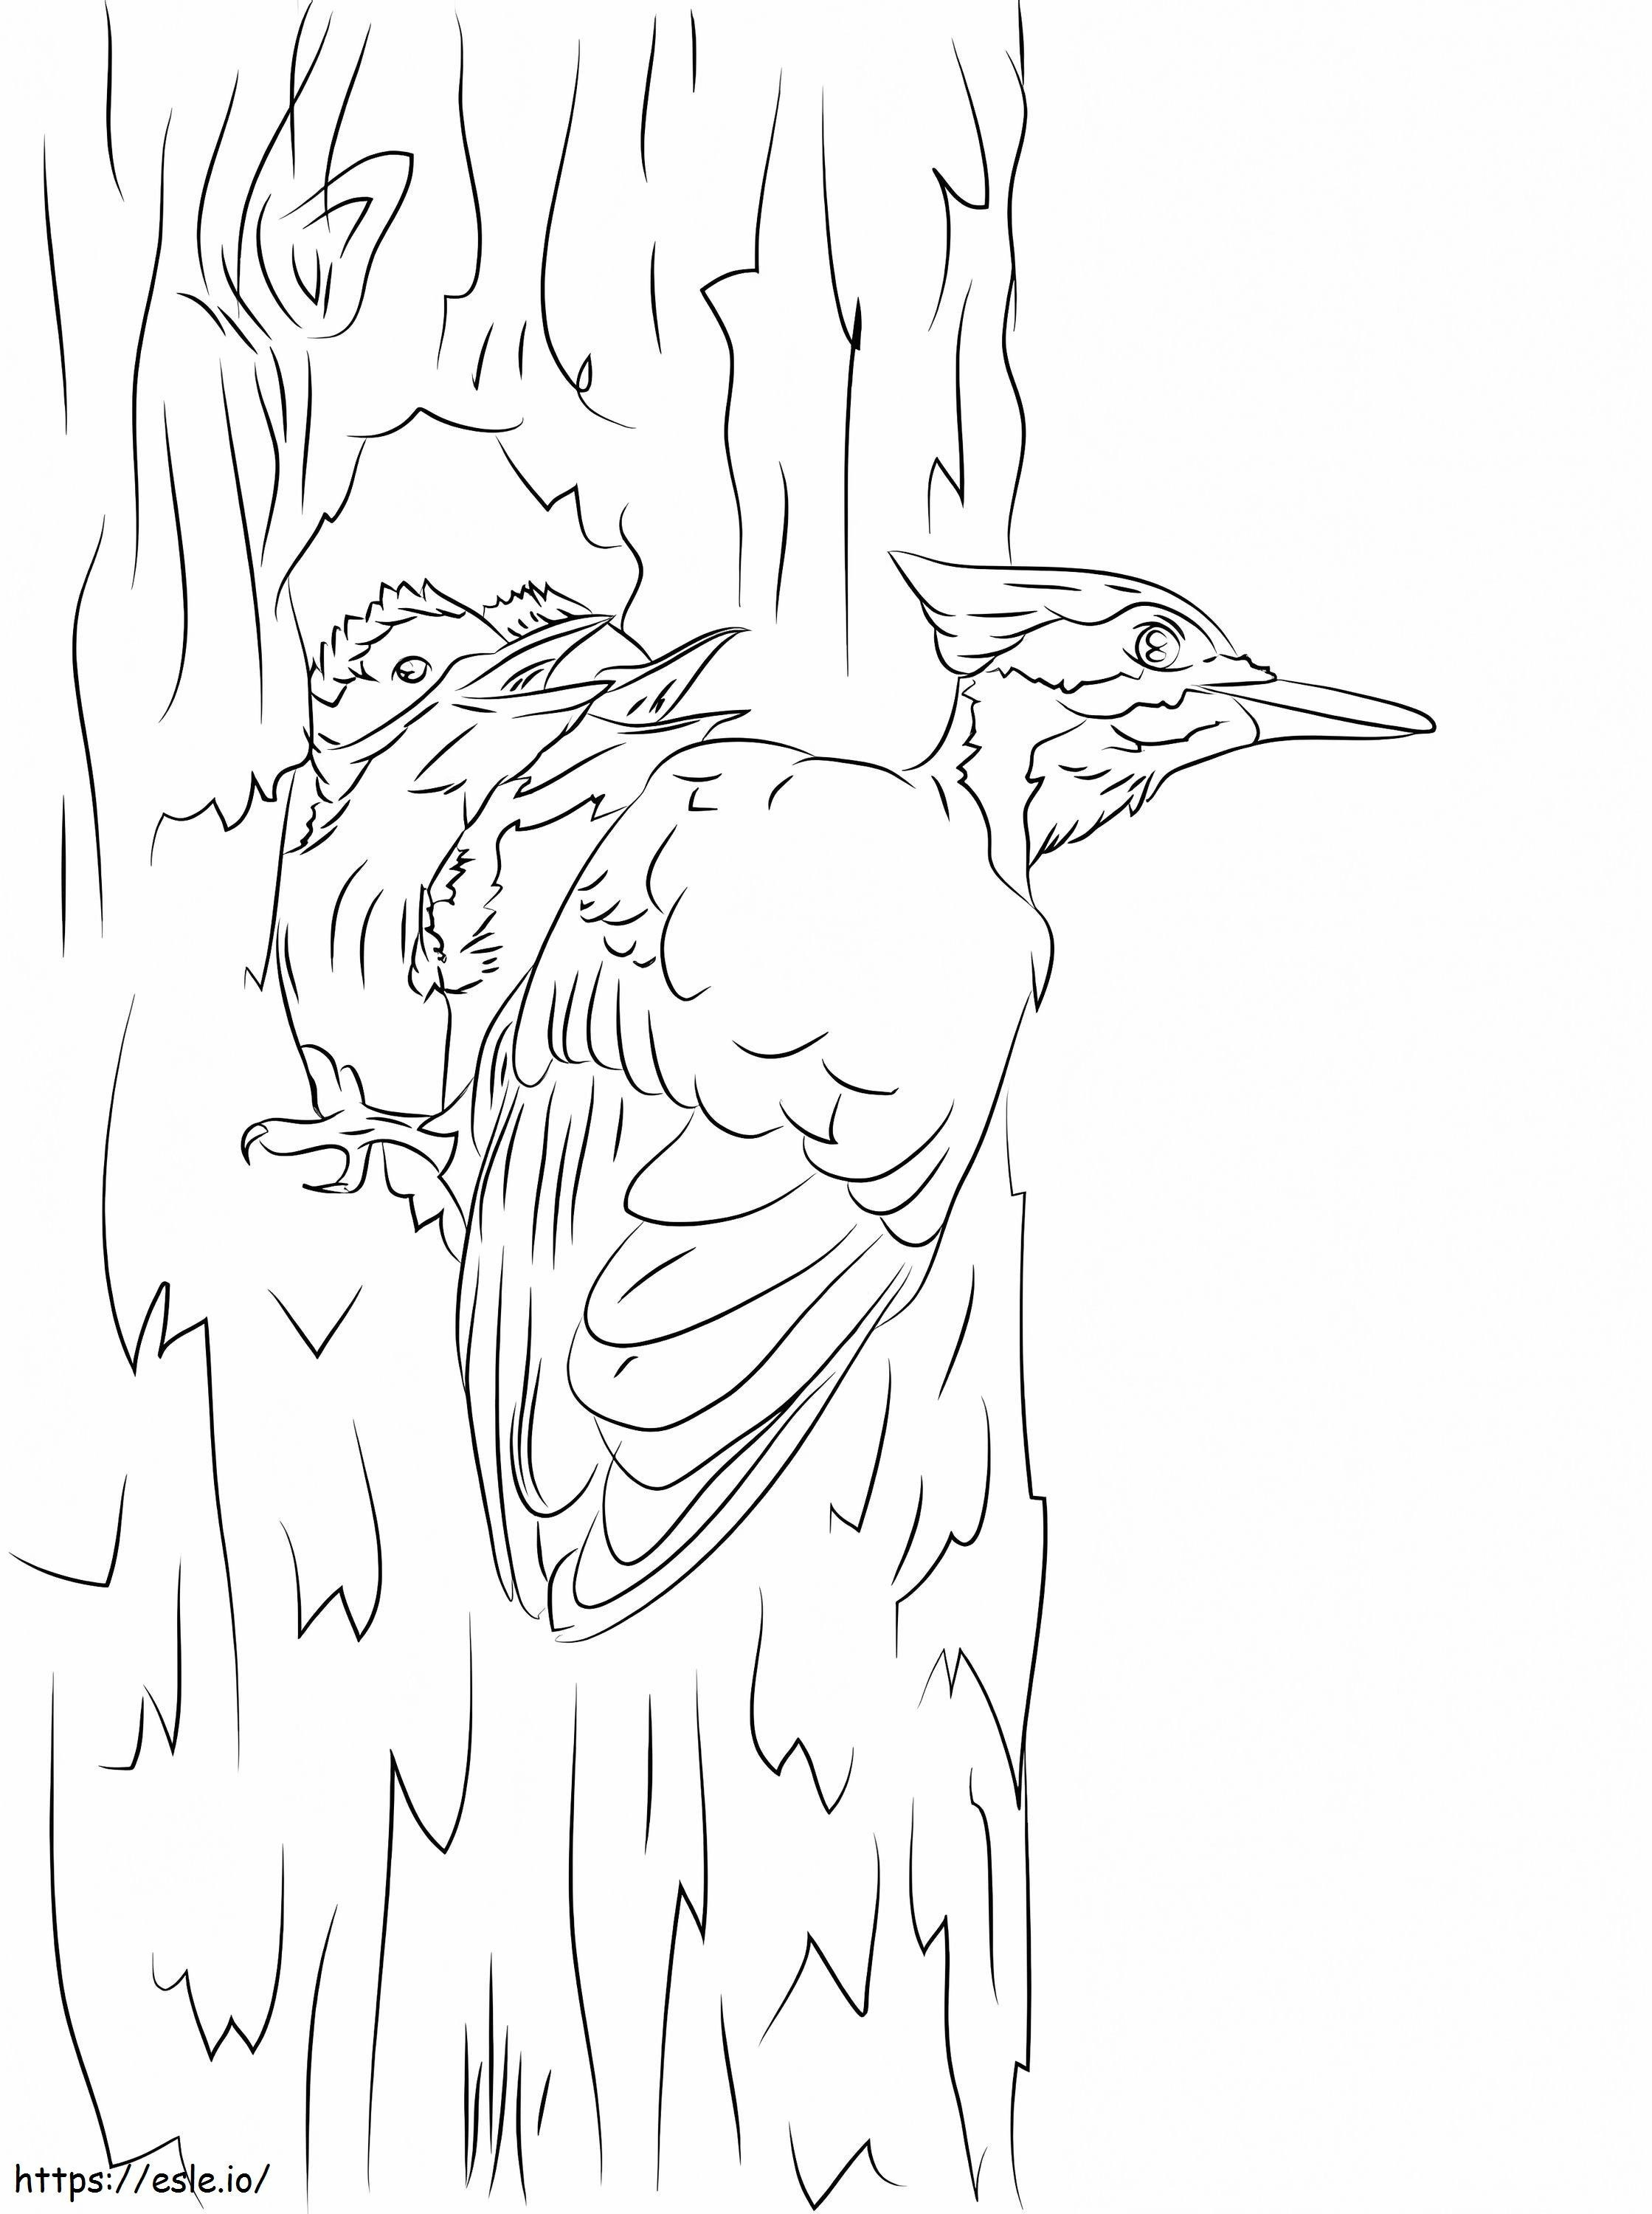 Pileated Carpenter Bird coloring page